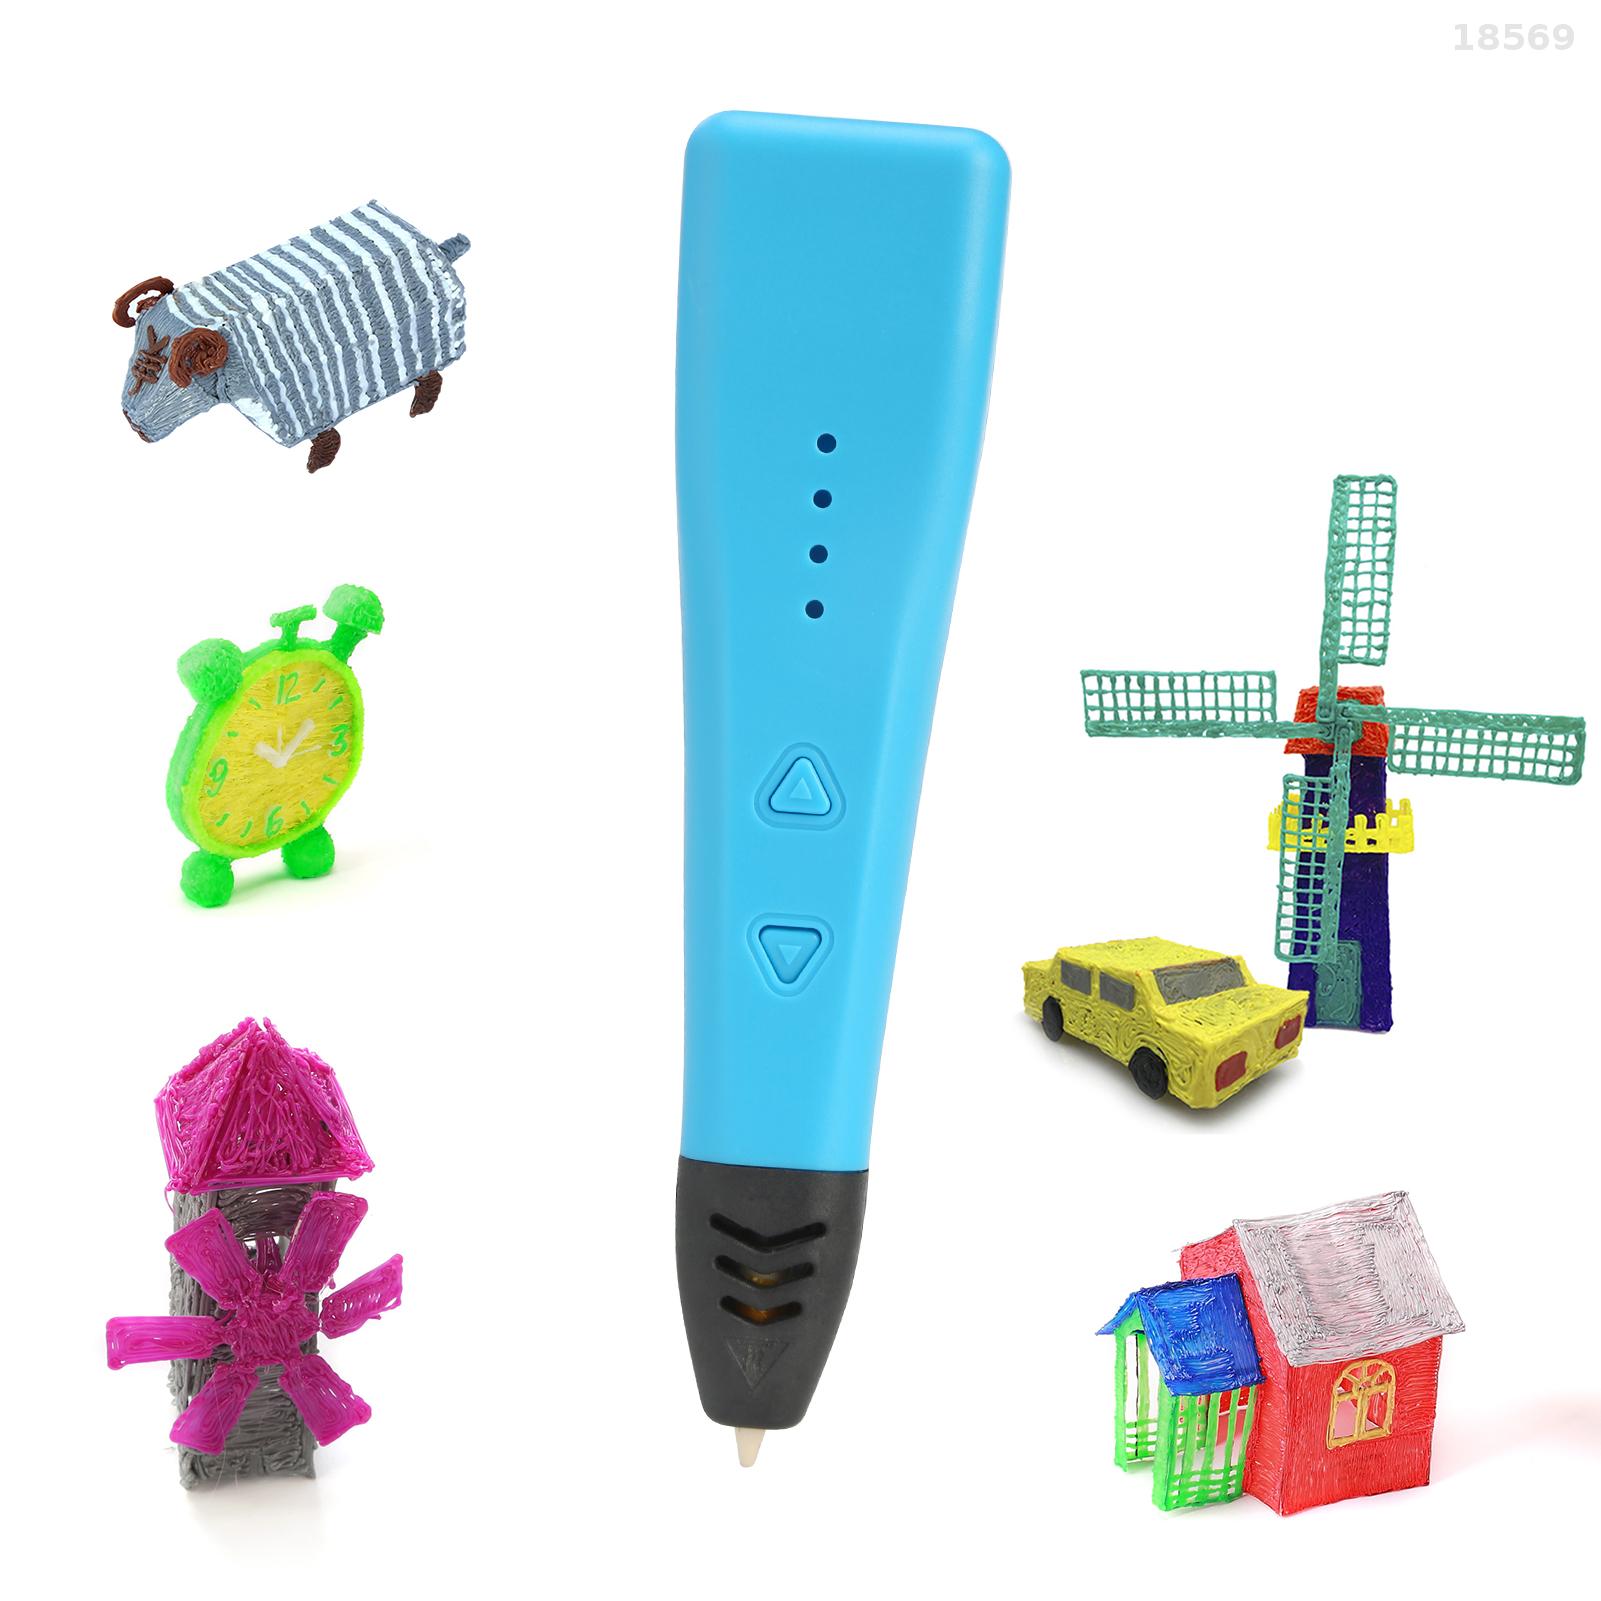 Birthday Gifts Brand Aveibee Model 3D Printer Pen With 1.75mm PLA